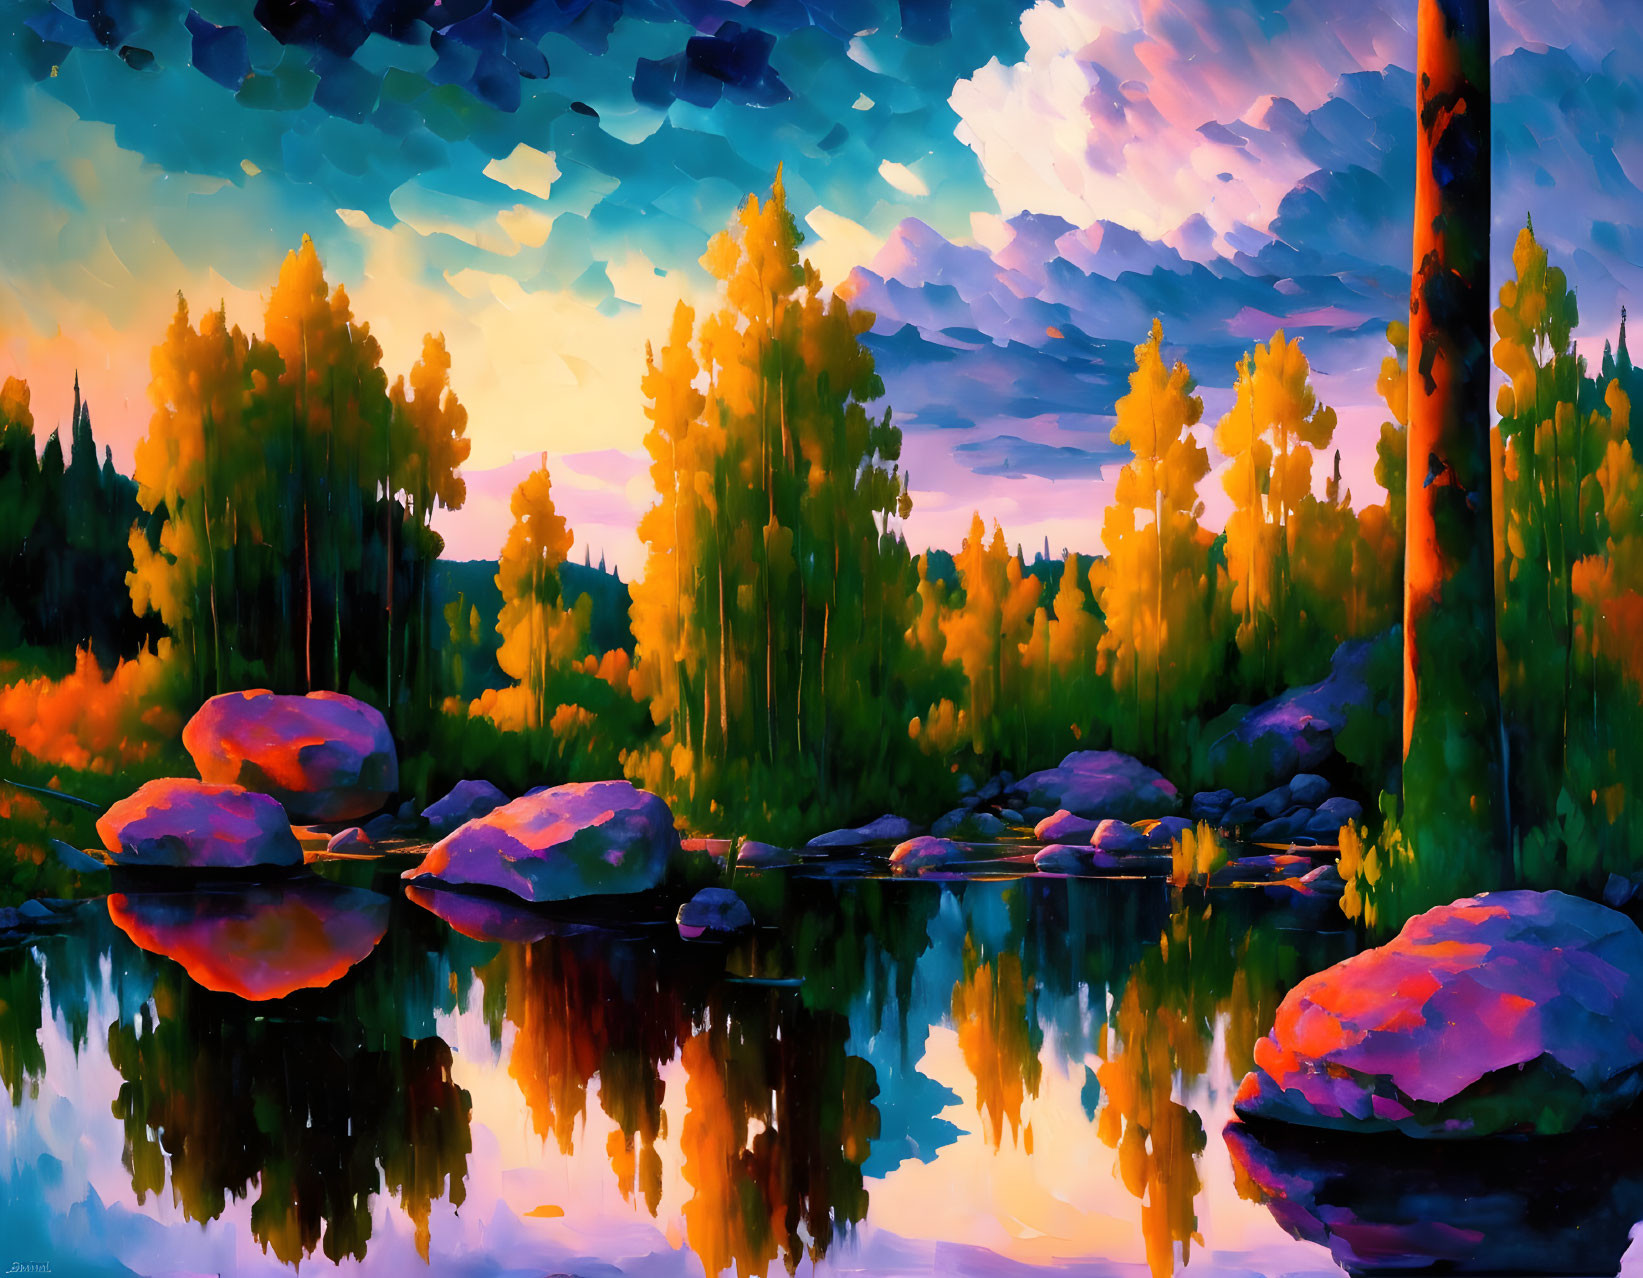 Vivid sunset lakeside painting with rocks, trees, and fluffy clouds